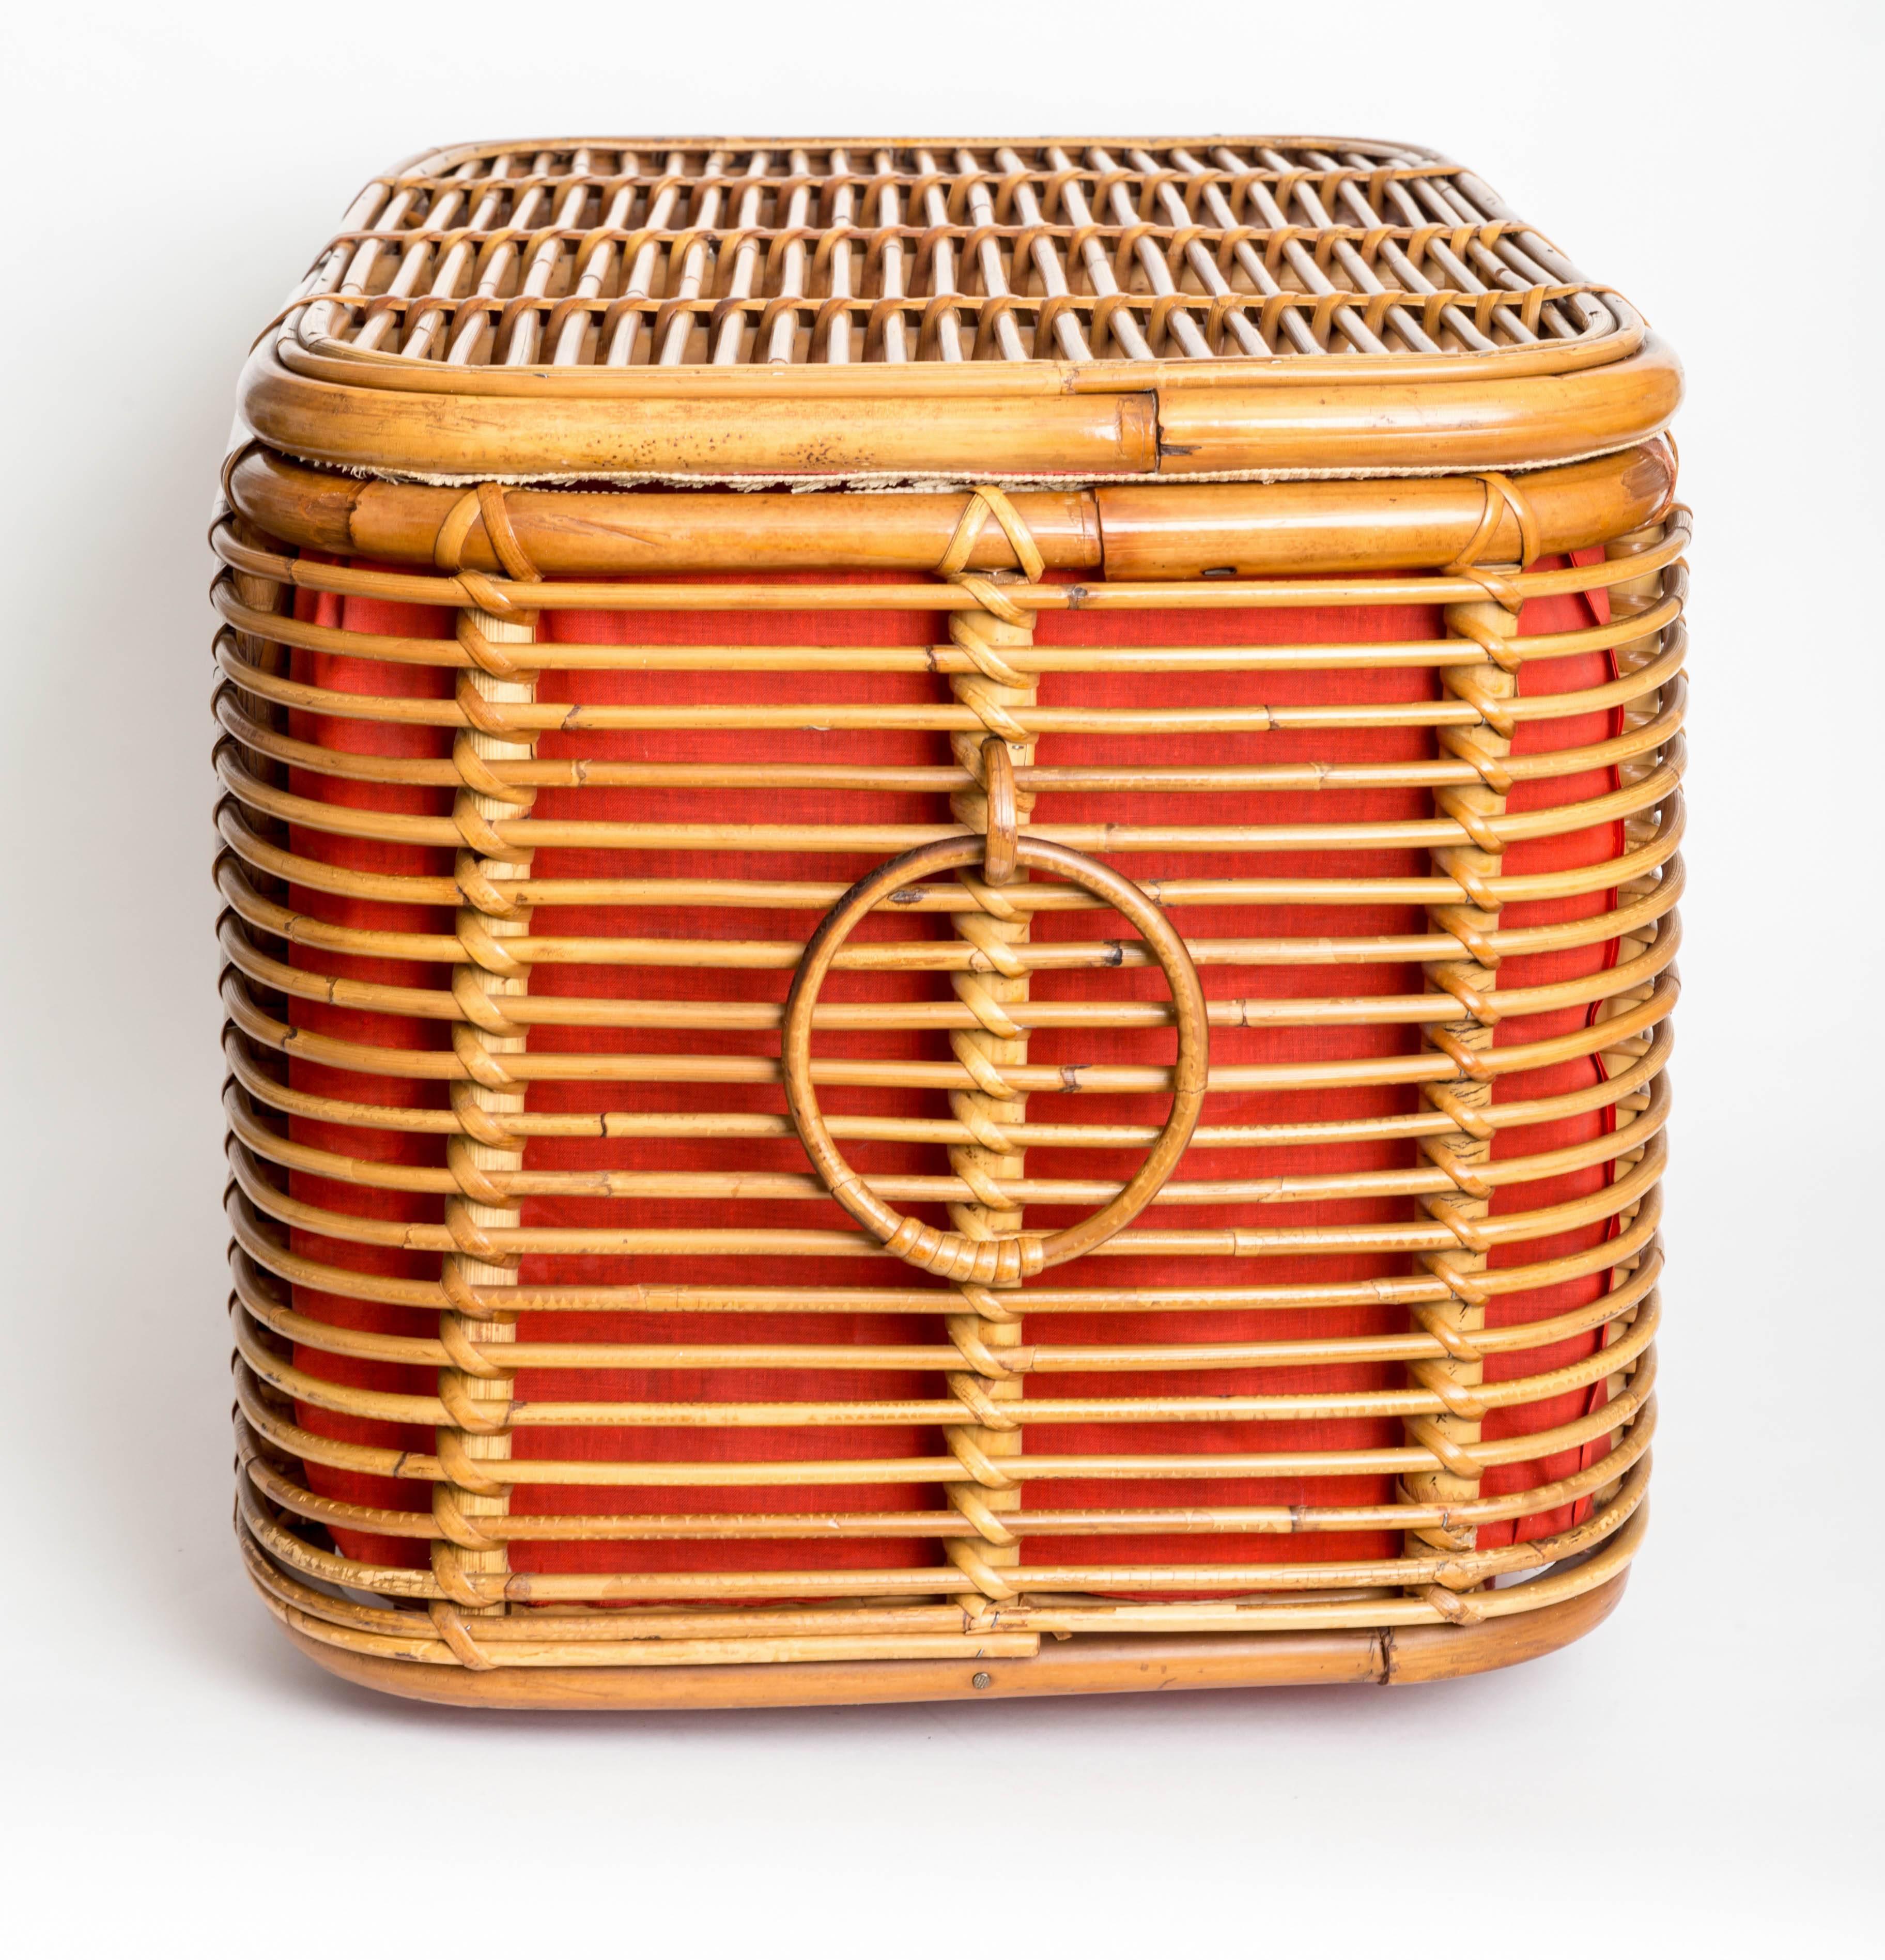 Hand-Woven Rattan Ottoman or Storage Chest with Fabric Lining